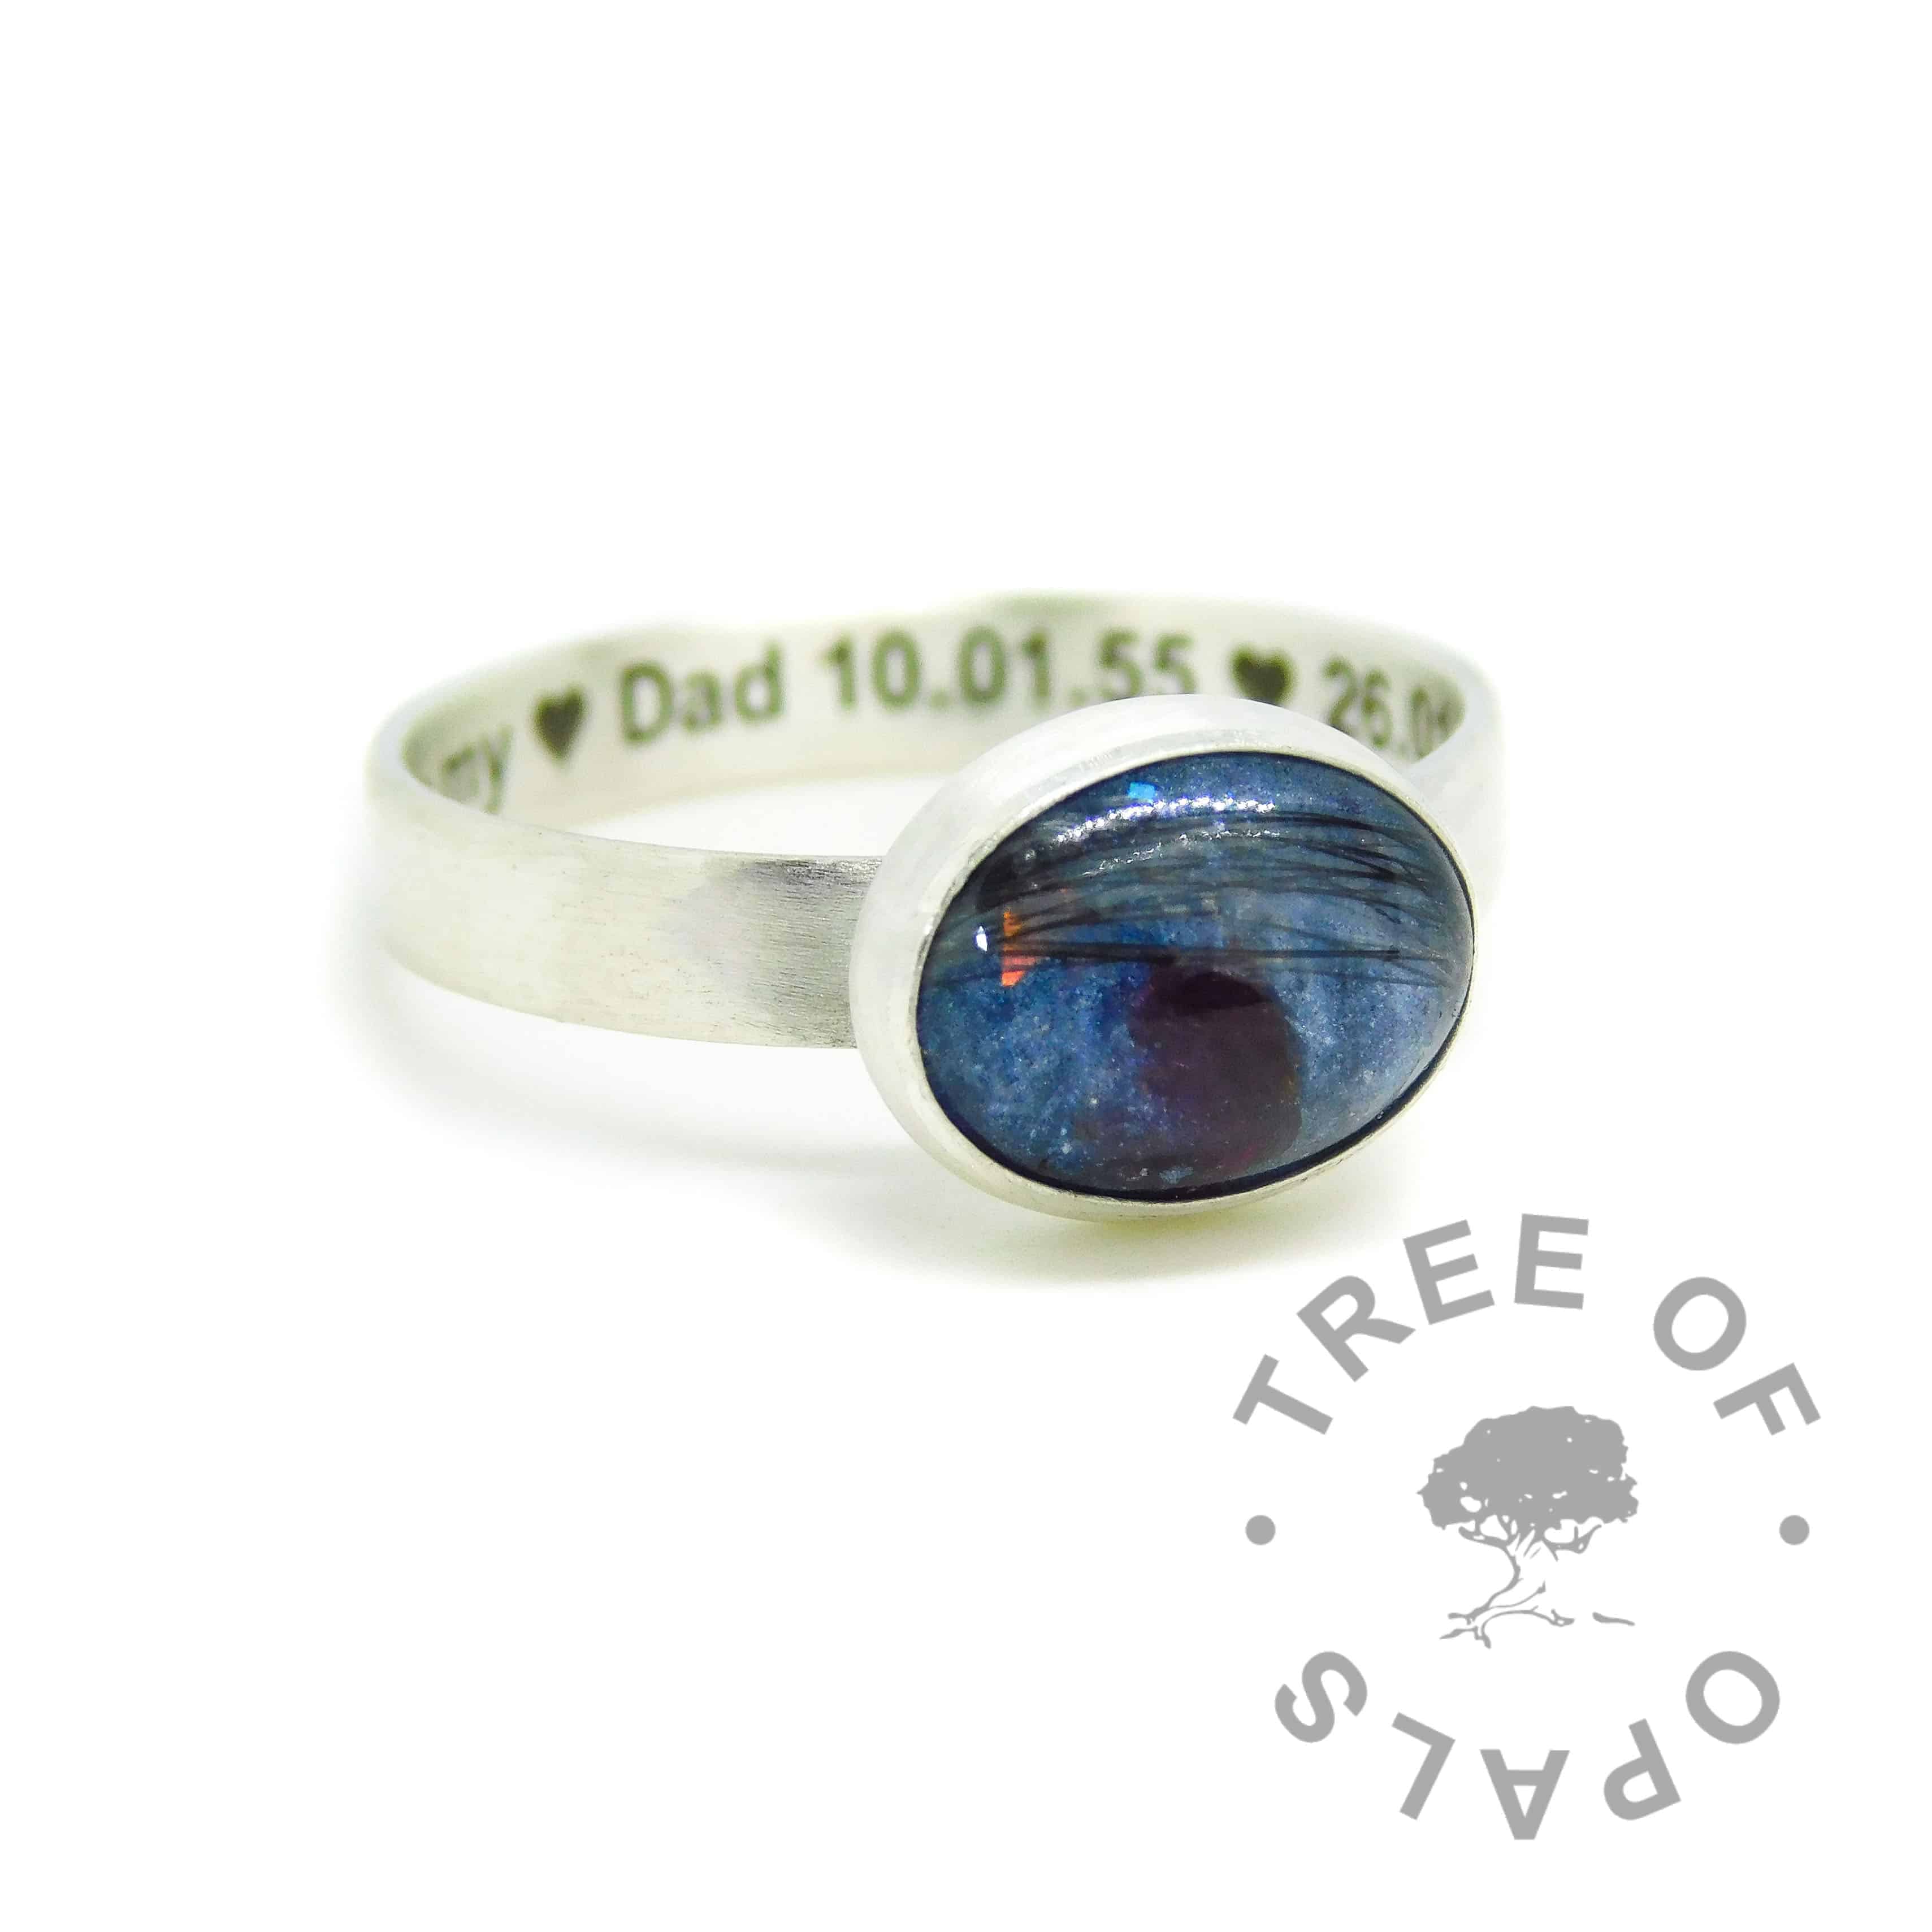 Engraved brushed band lock of hair ring with Aegean blue resin sparkle mix and salt and pepper grey hair, with January birthstone red garnet. Engraved inside in Arial font and hearts. Handmade solid sterling silver memorial ring